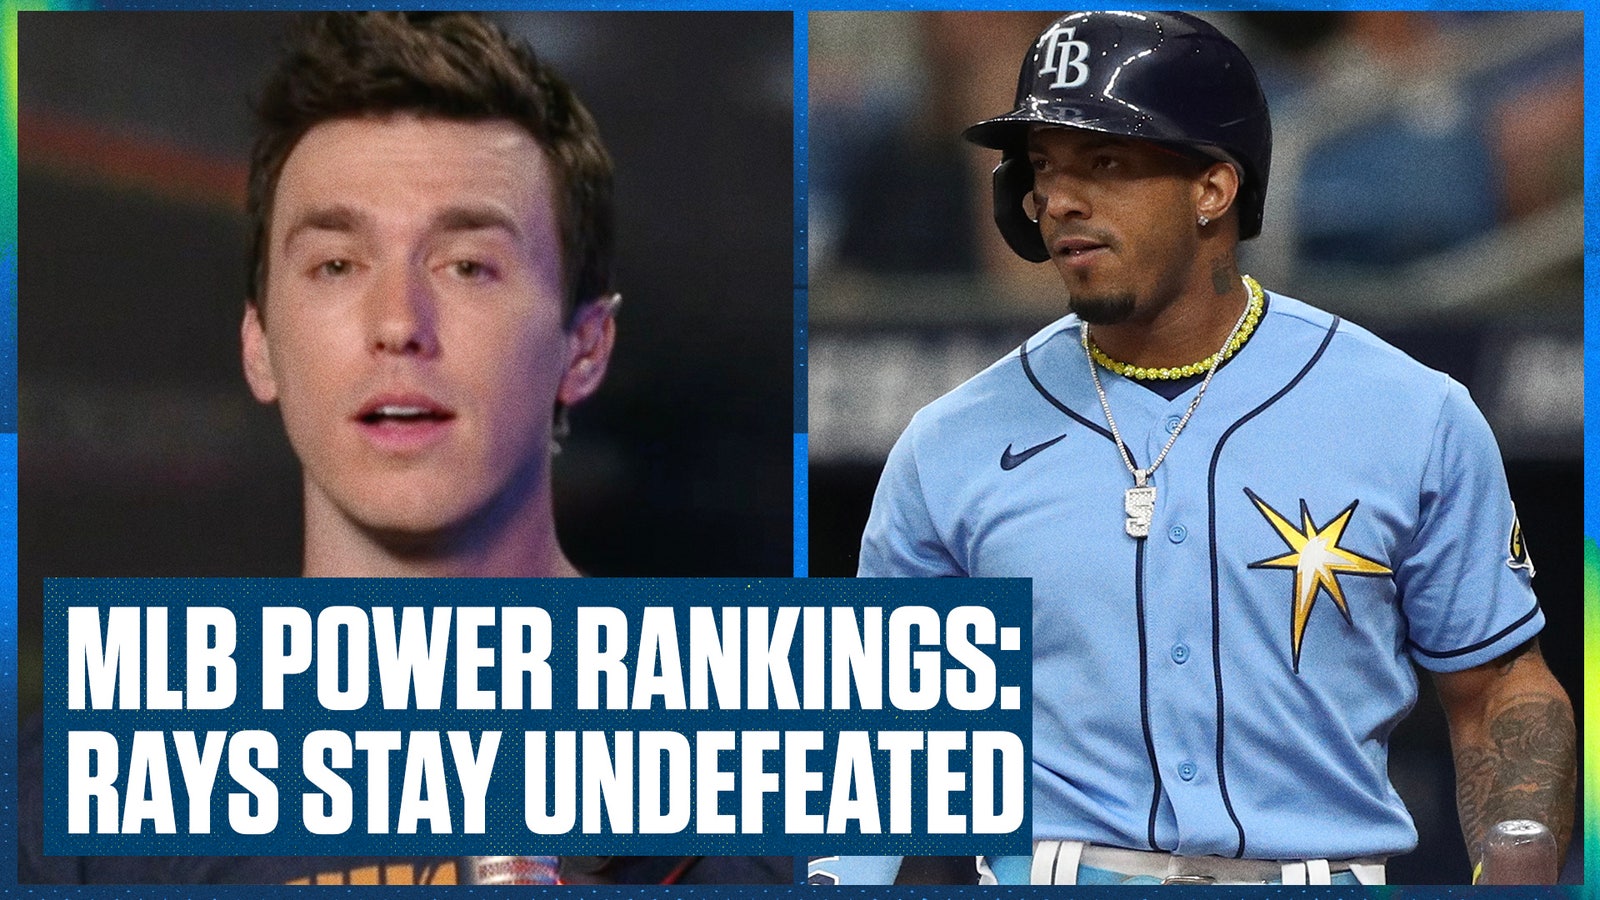 MLB Power Rankings: The undefeated Tampa Bay Rays are ranked No. 1